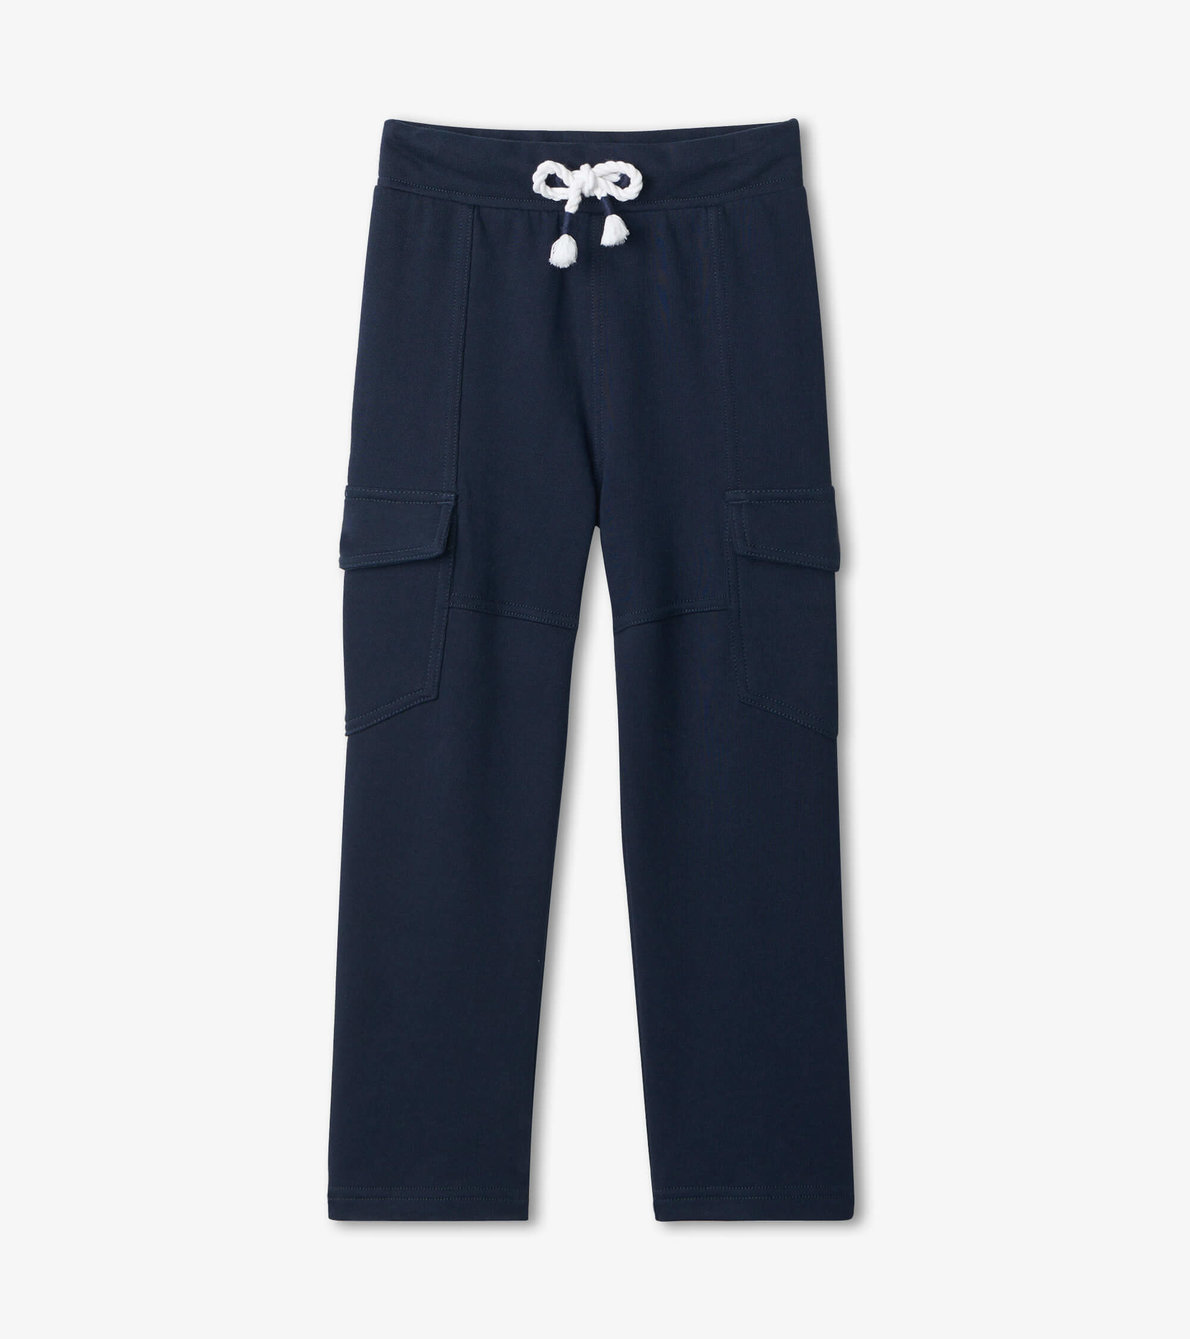 View larger image of Boys Navy Blue Slim Fit Joggers